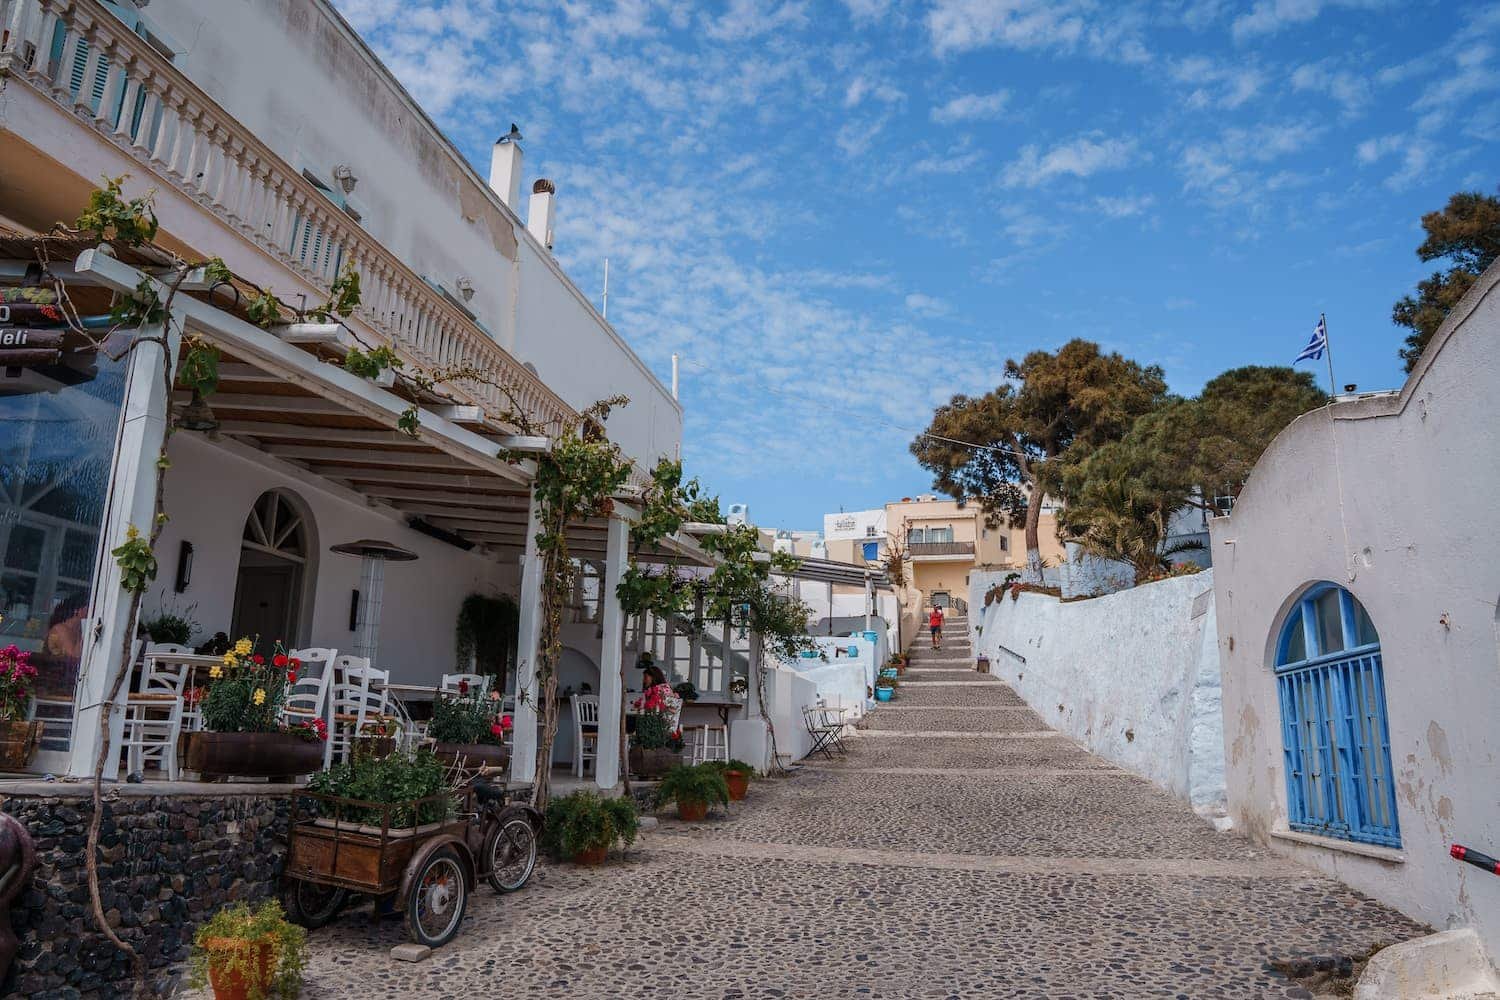 A cobbled street in a white building with blue shutters, part of a 3 Day Santorini Itinerary.